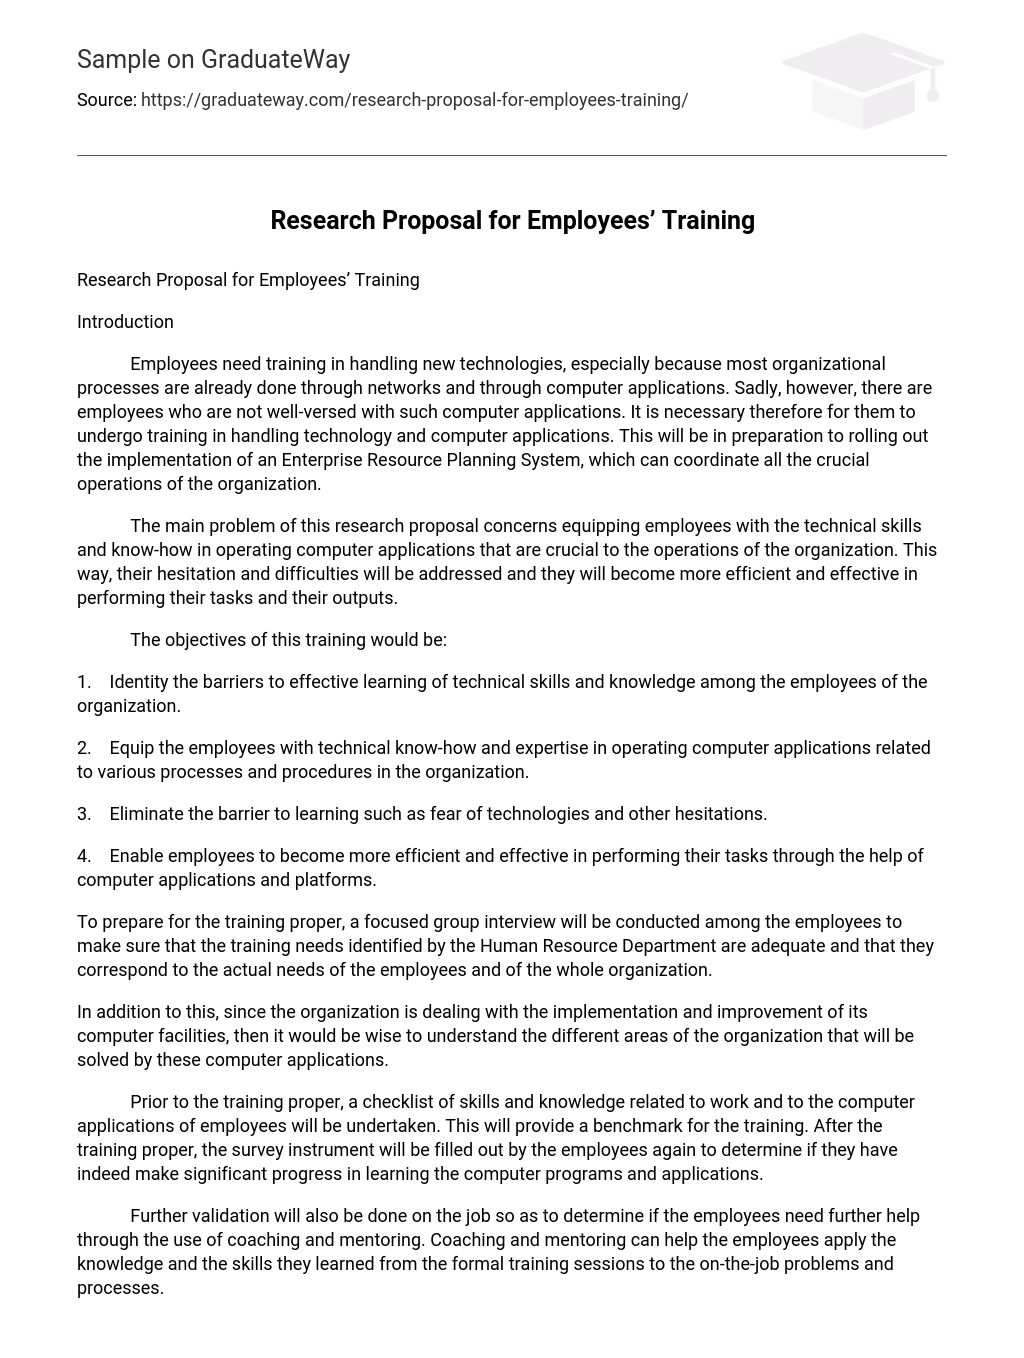 Research Proposal for Employees’ Training